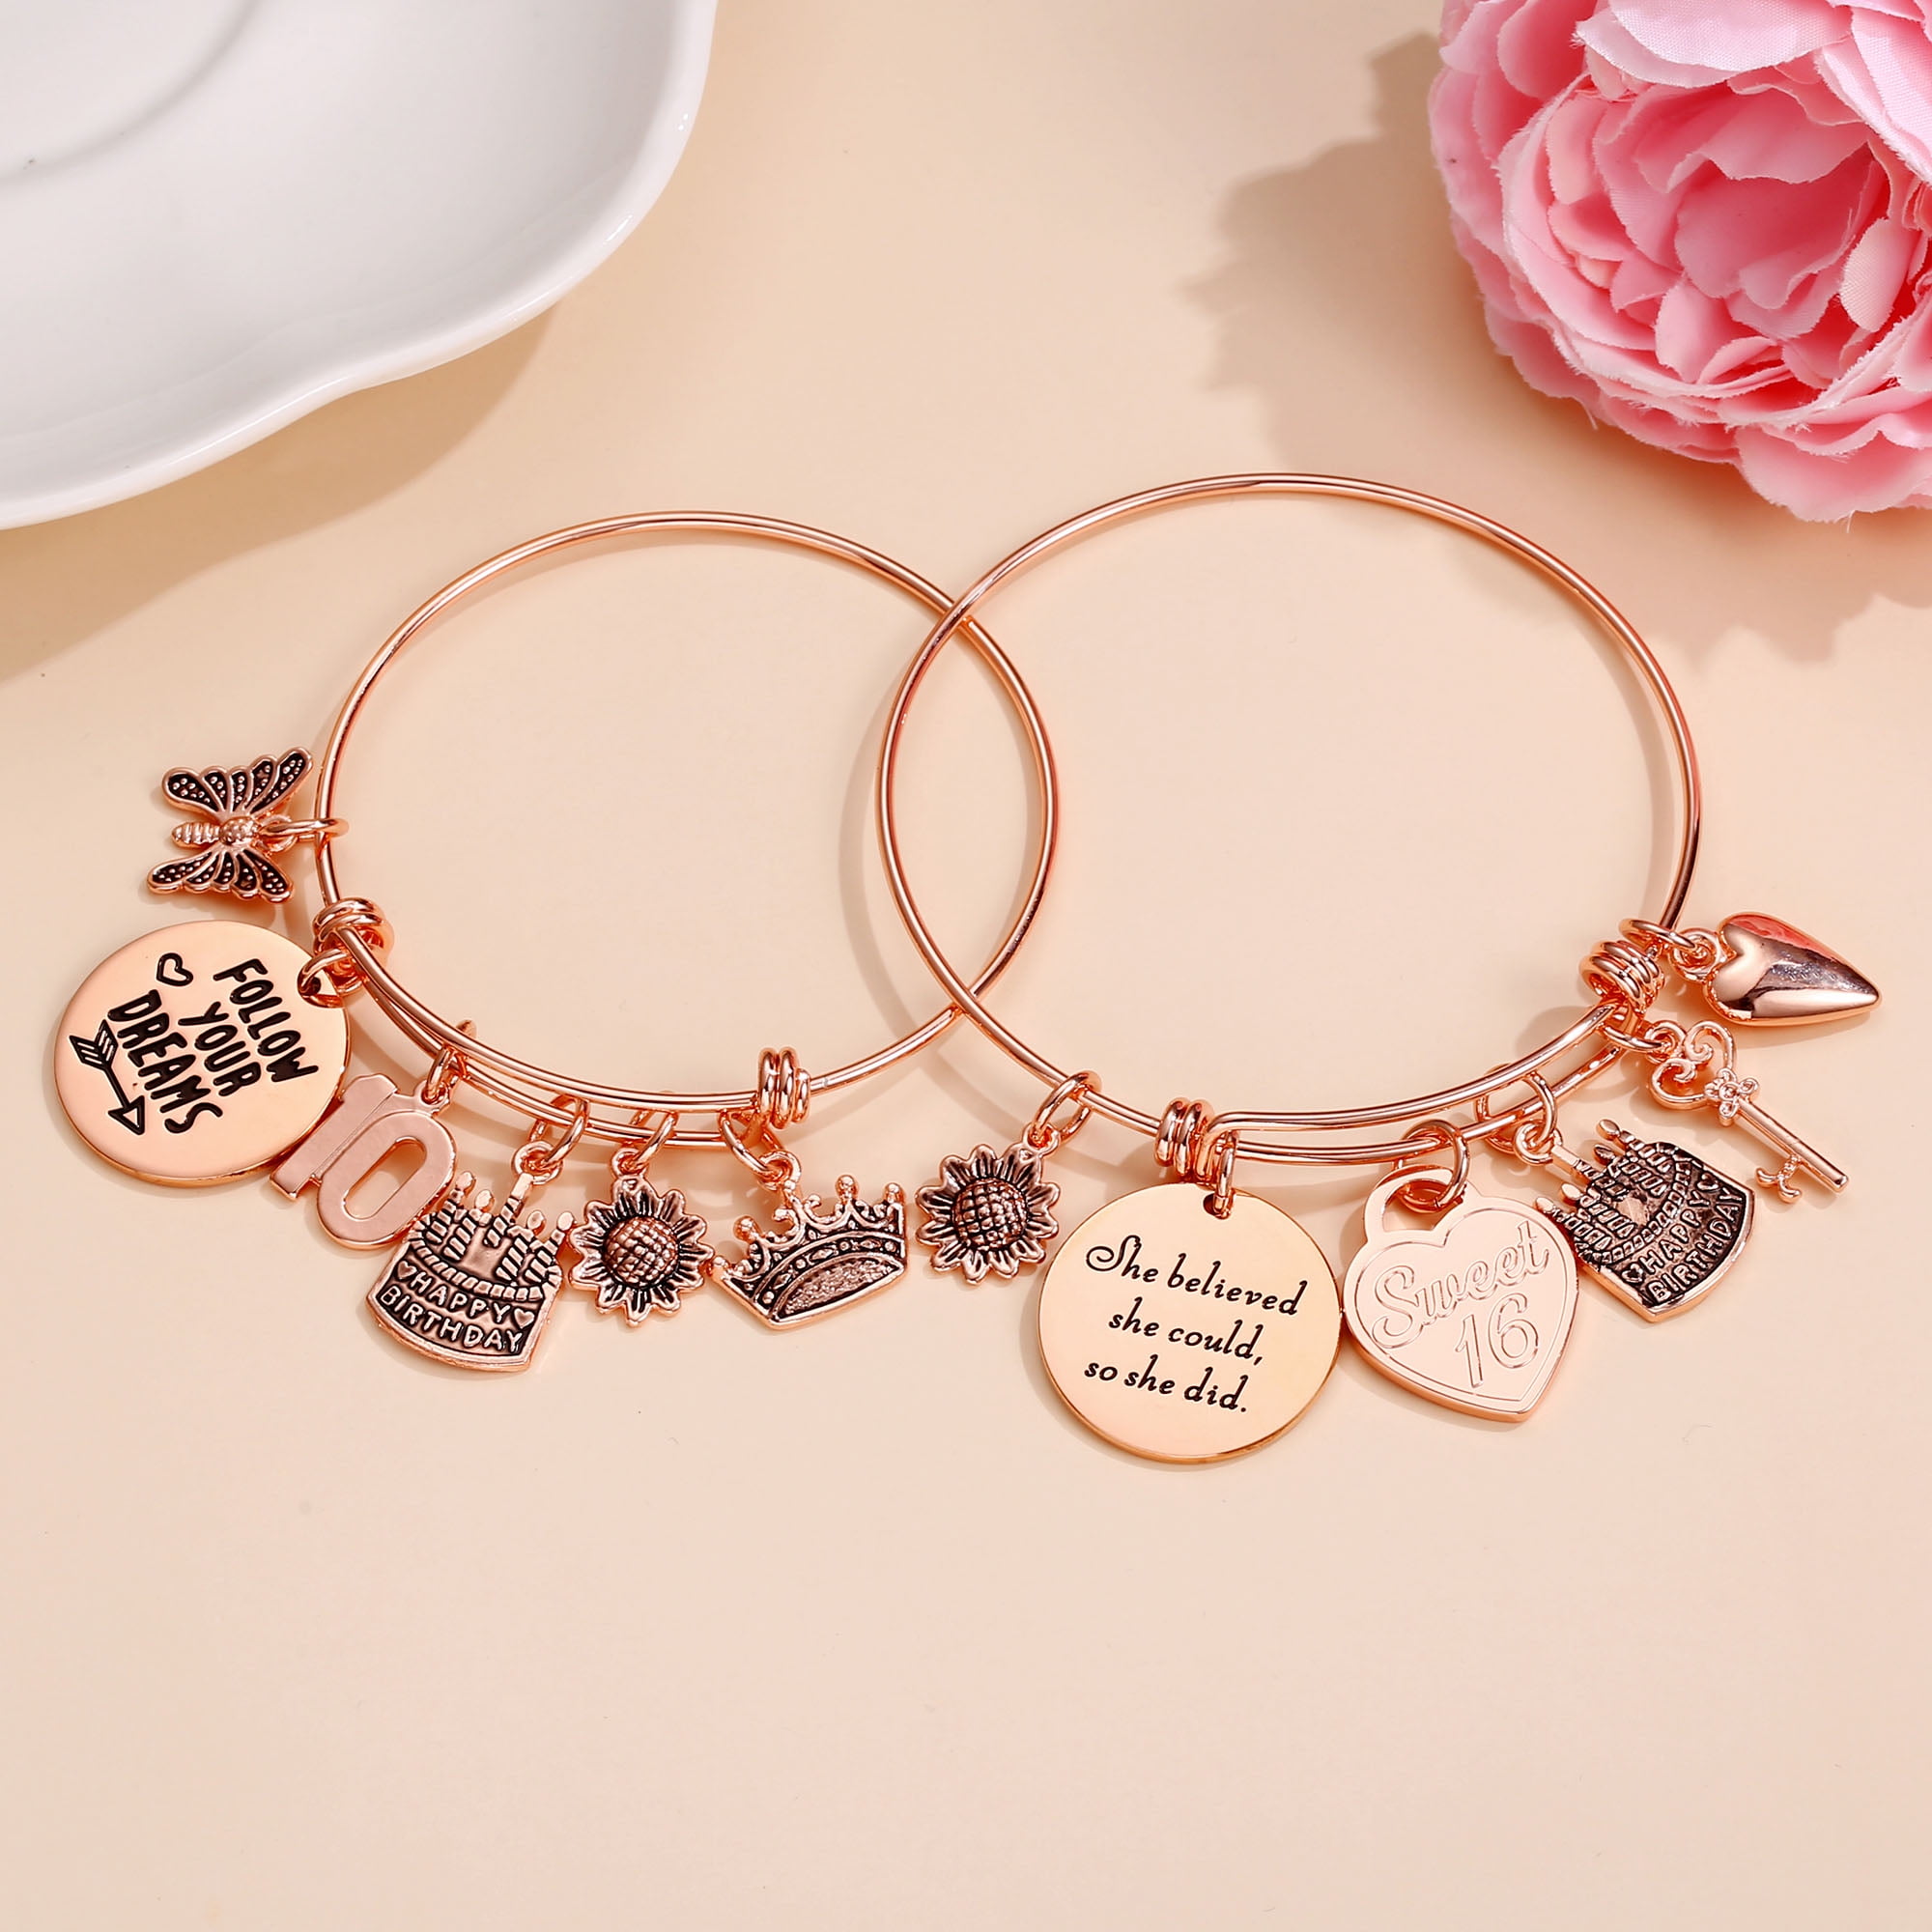  Initial Charm Bracelets for Women Girls, Rose Gold Letter R  Initial Charm Bracelets for Women Girls Jewelry, Teenage Gifts for Teen  Girls Present Rose Gold Crystal Heart Charm Bangle Bracelet 